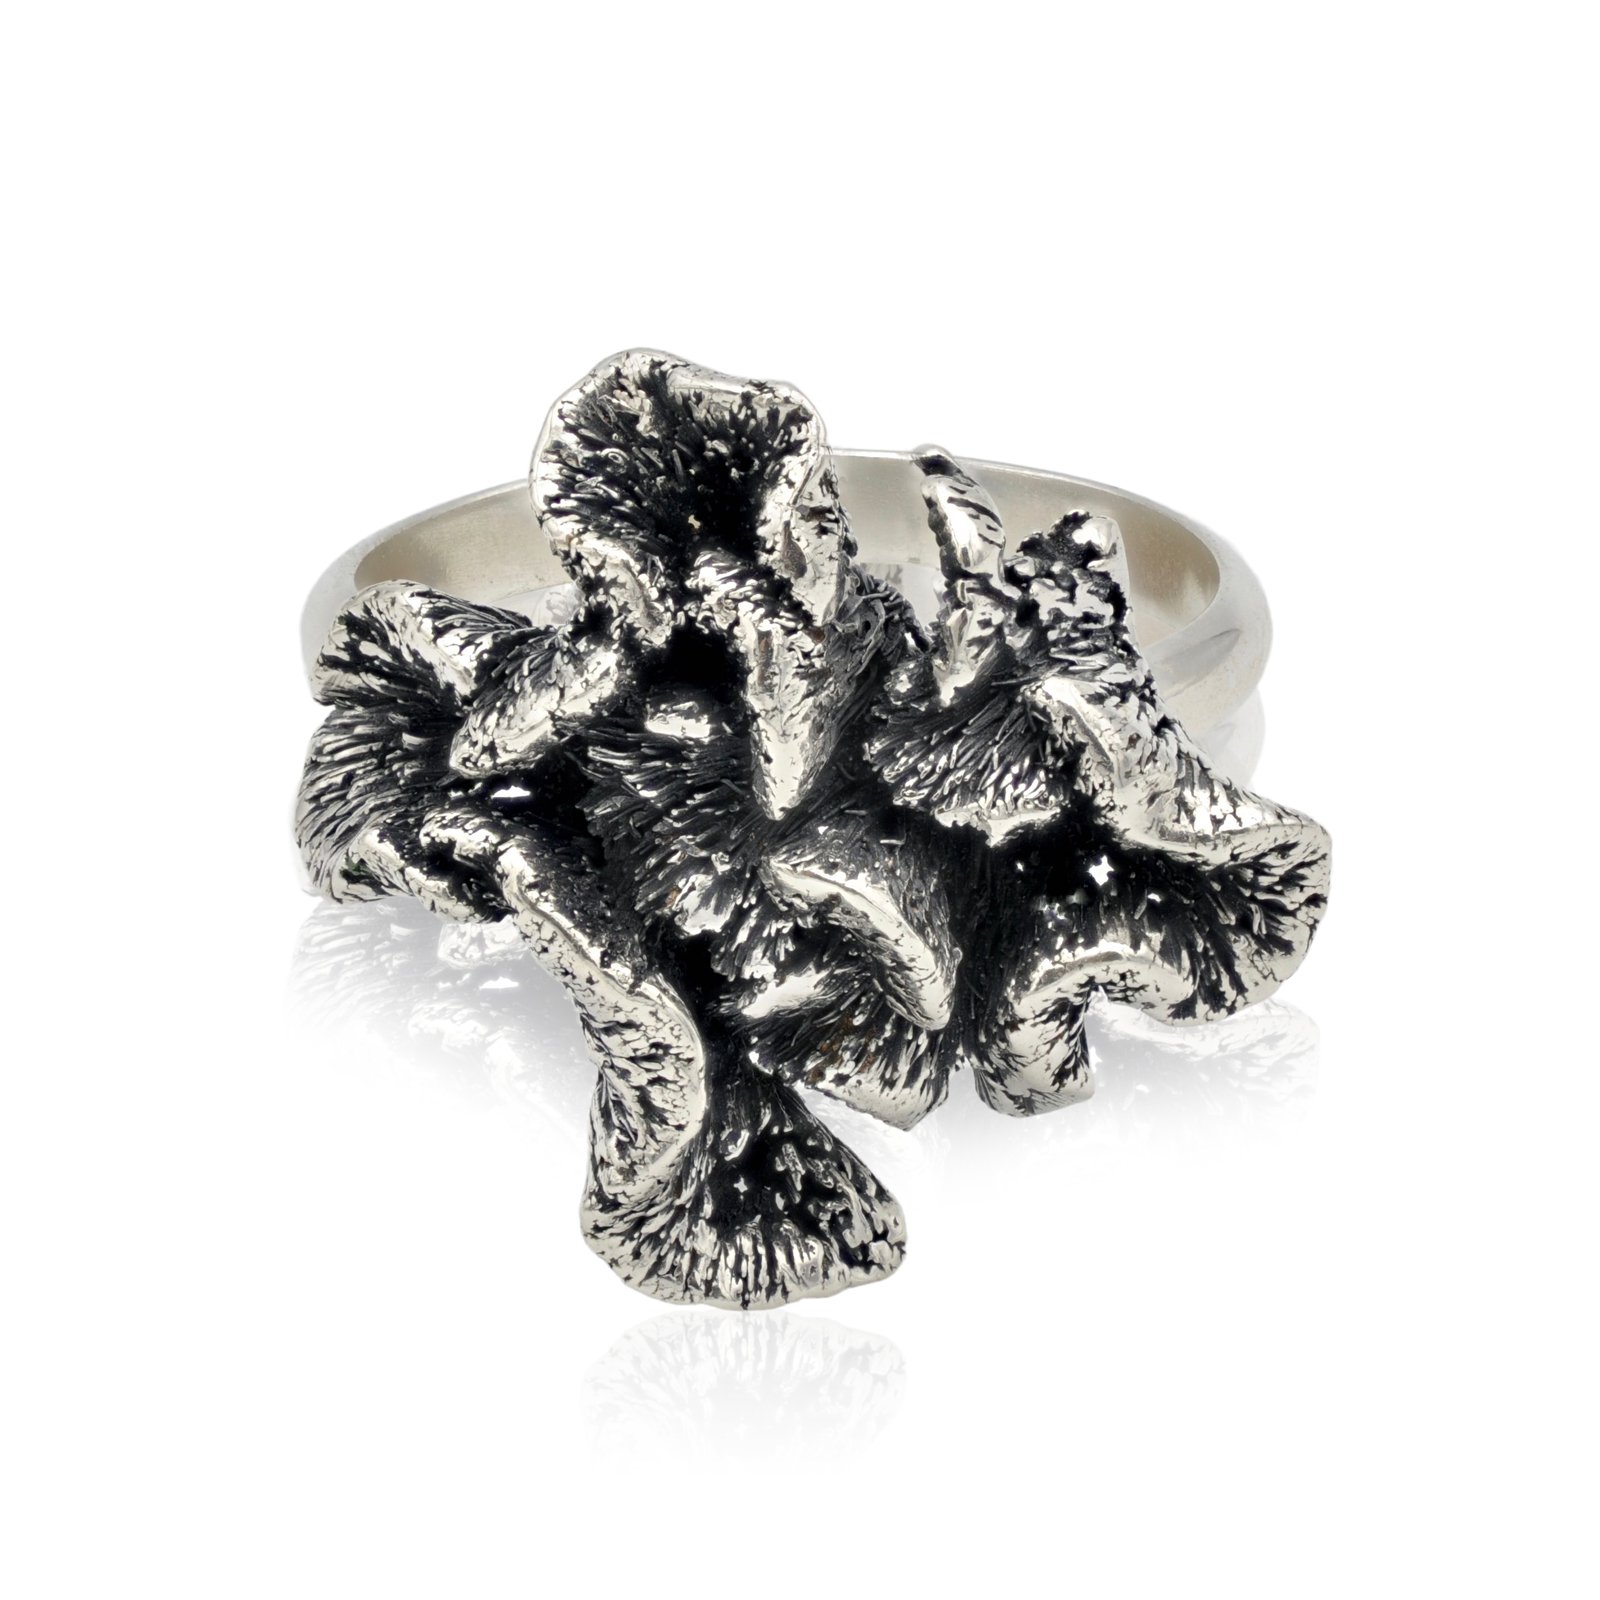 cockscombs-antiqued-sterling-silver-ring-3.jpg